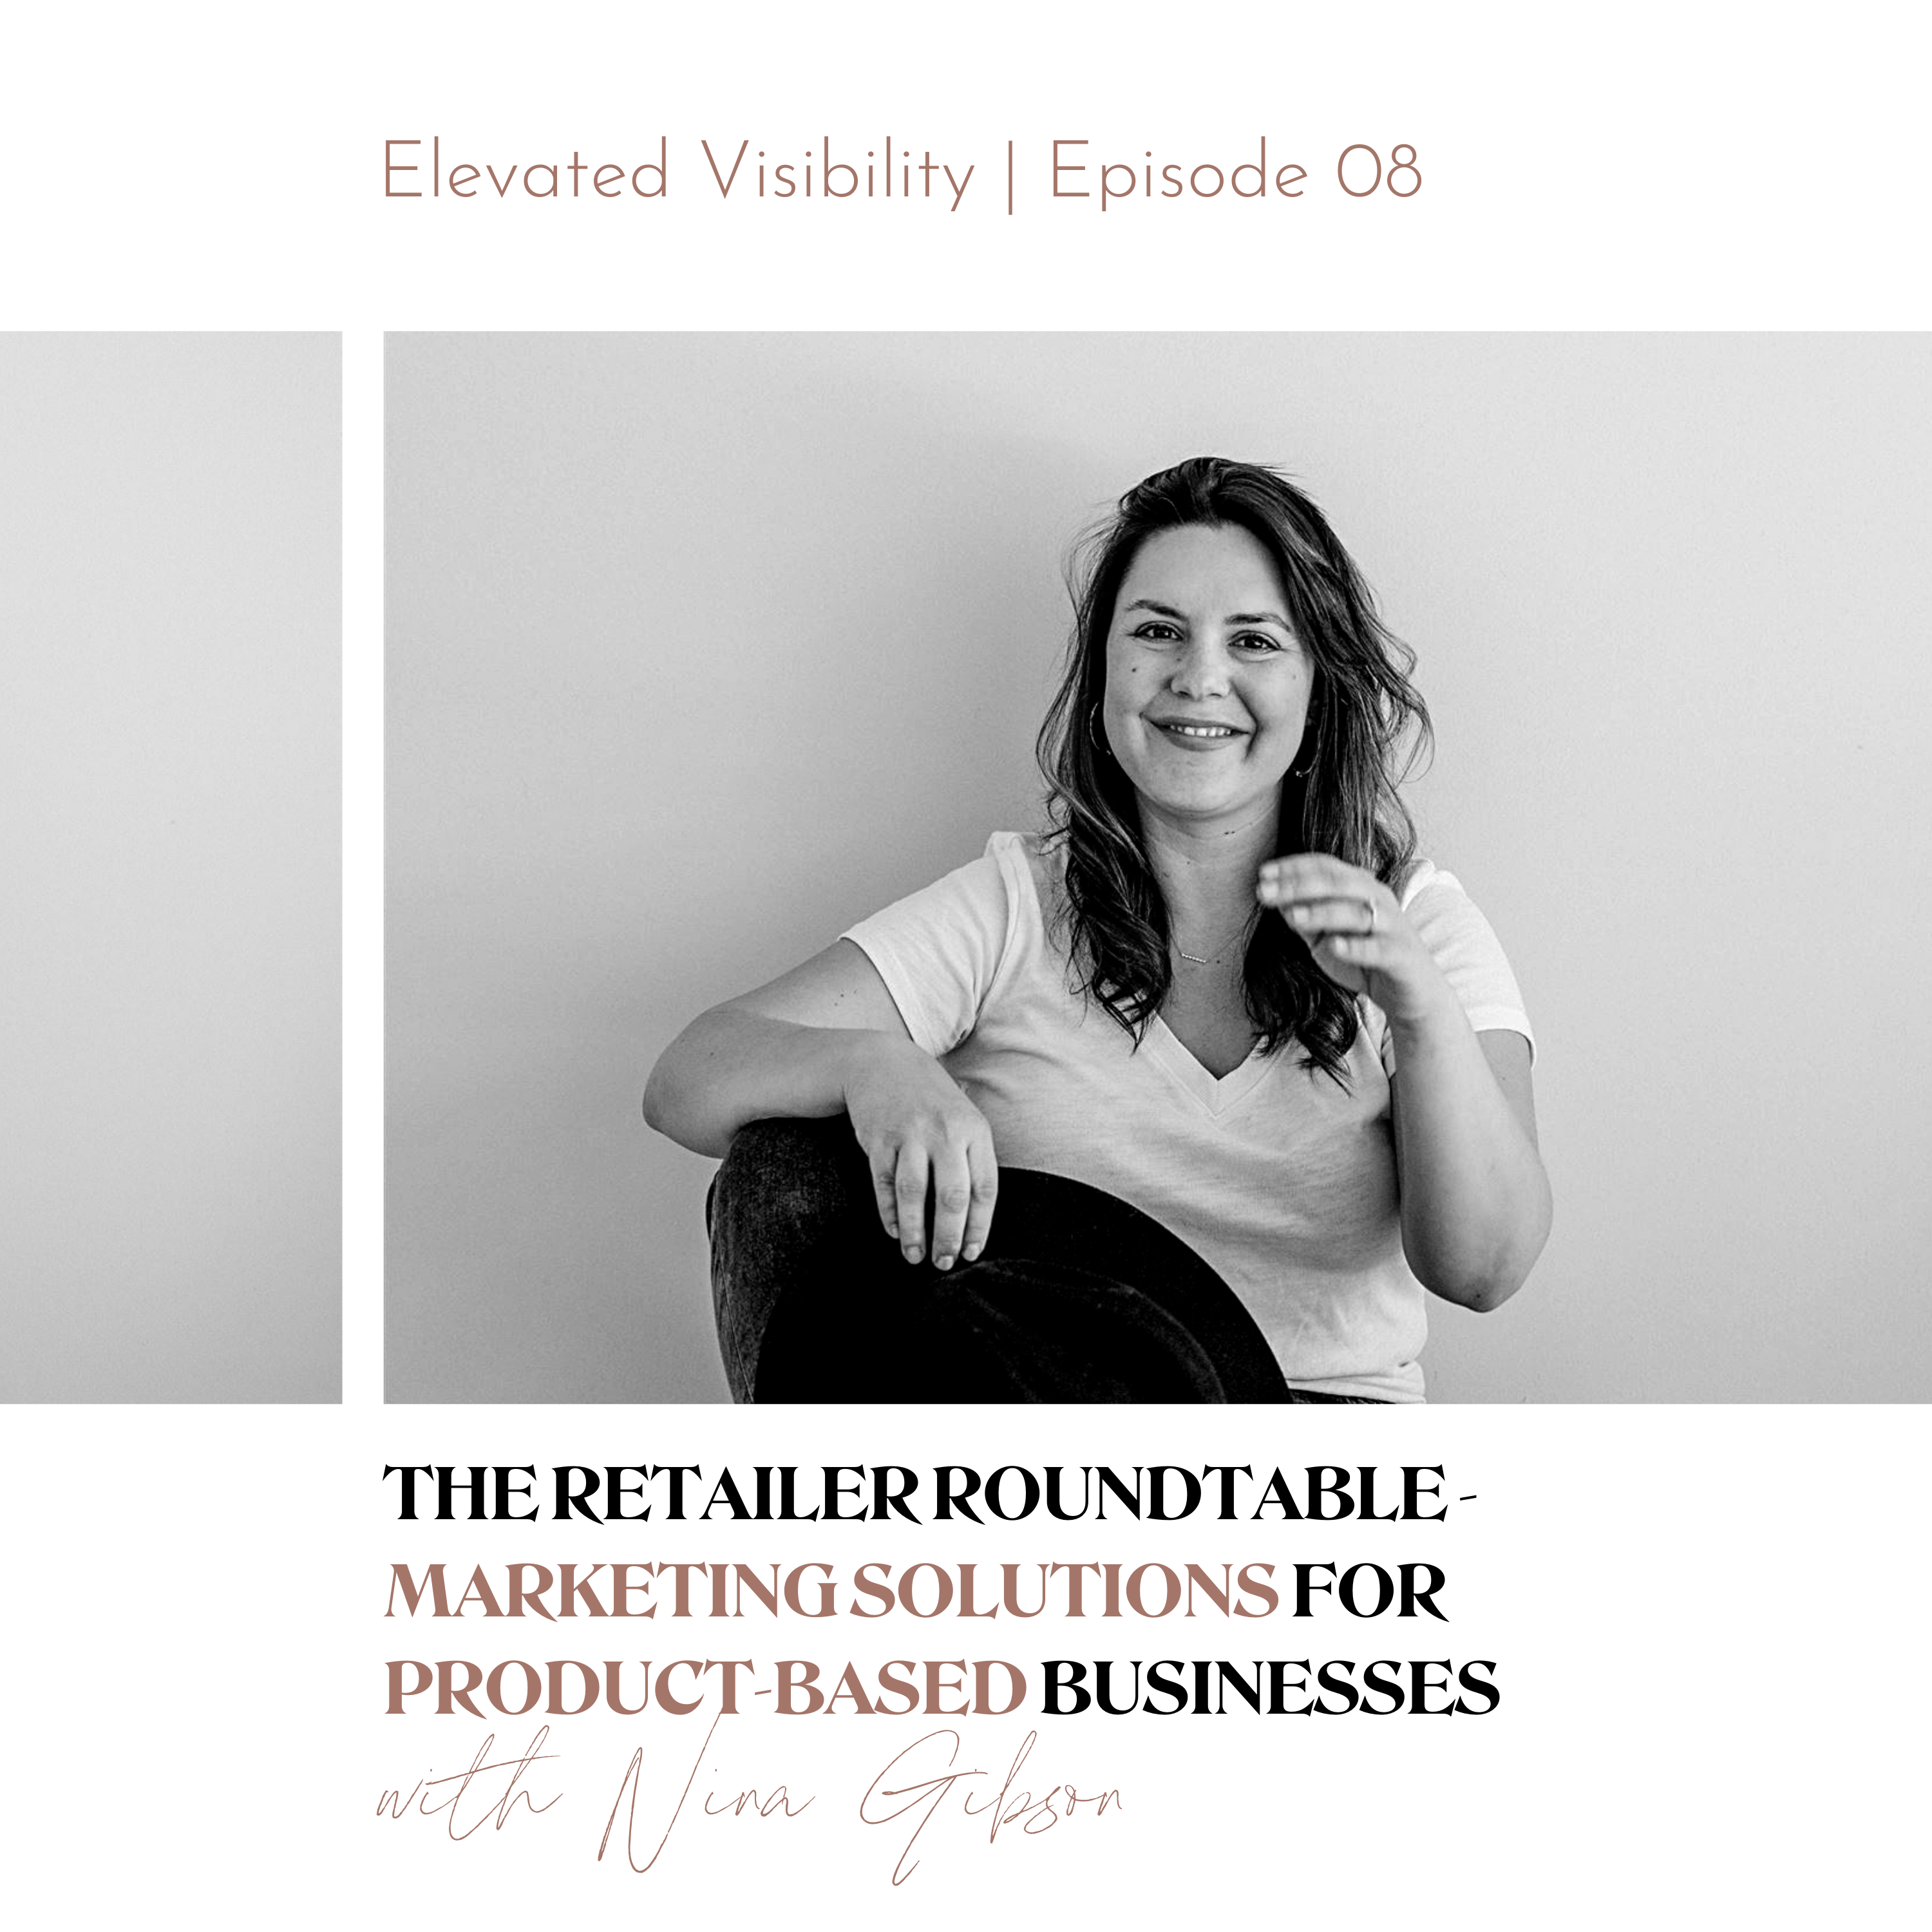 Cover Image for the Elevated Visibility Podcast E8